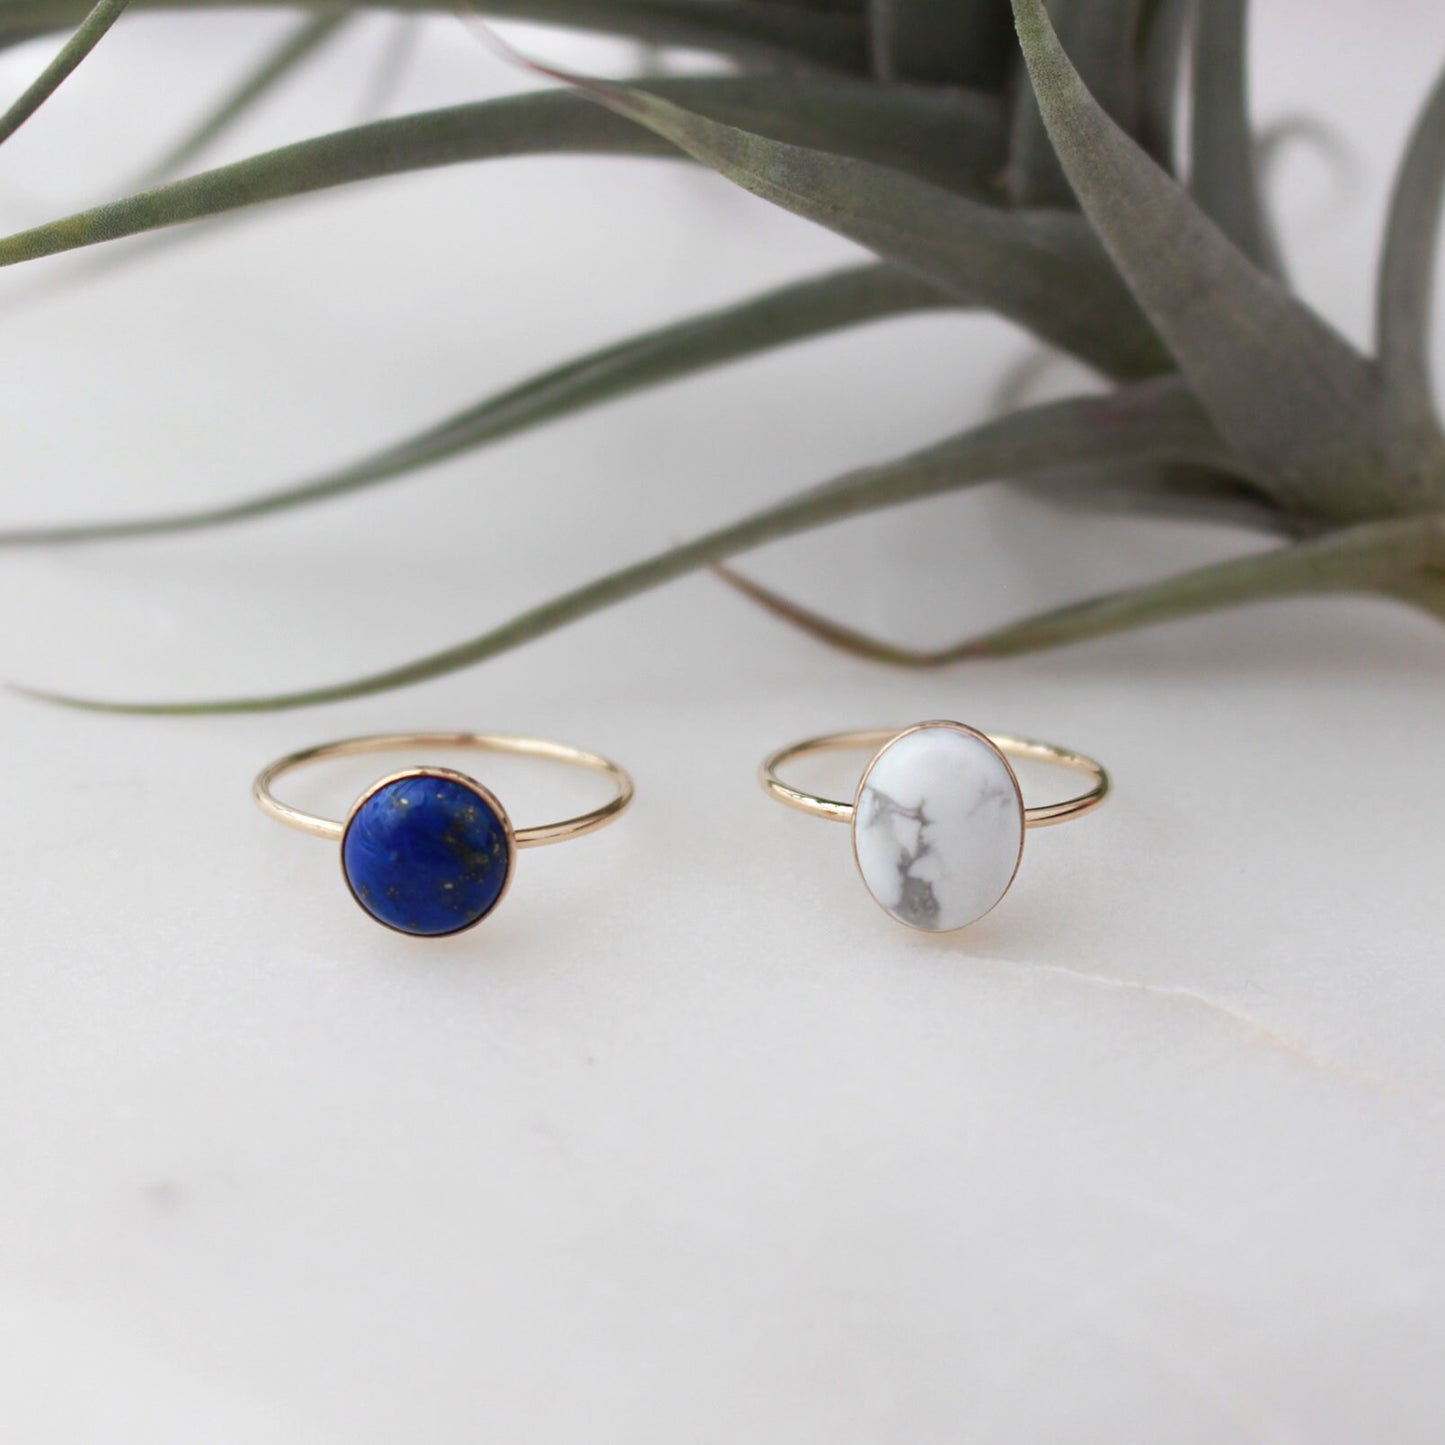 Oval Marble Ring - 14K Gold Filled, 8x10mm Oval Howlite Stone, 1mm Gold Filled Ring